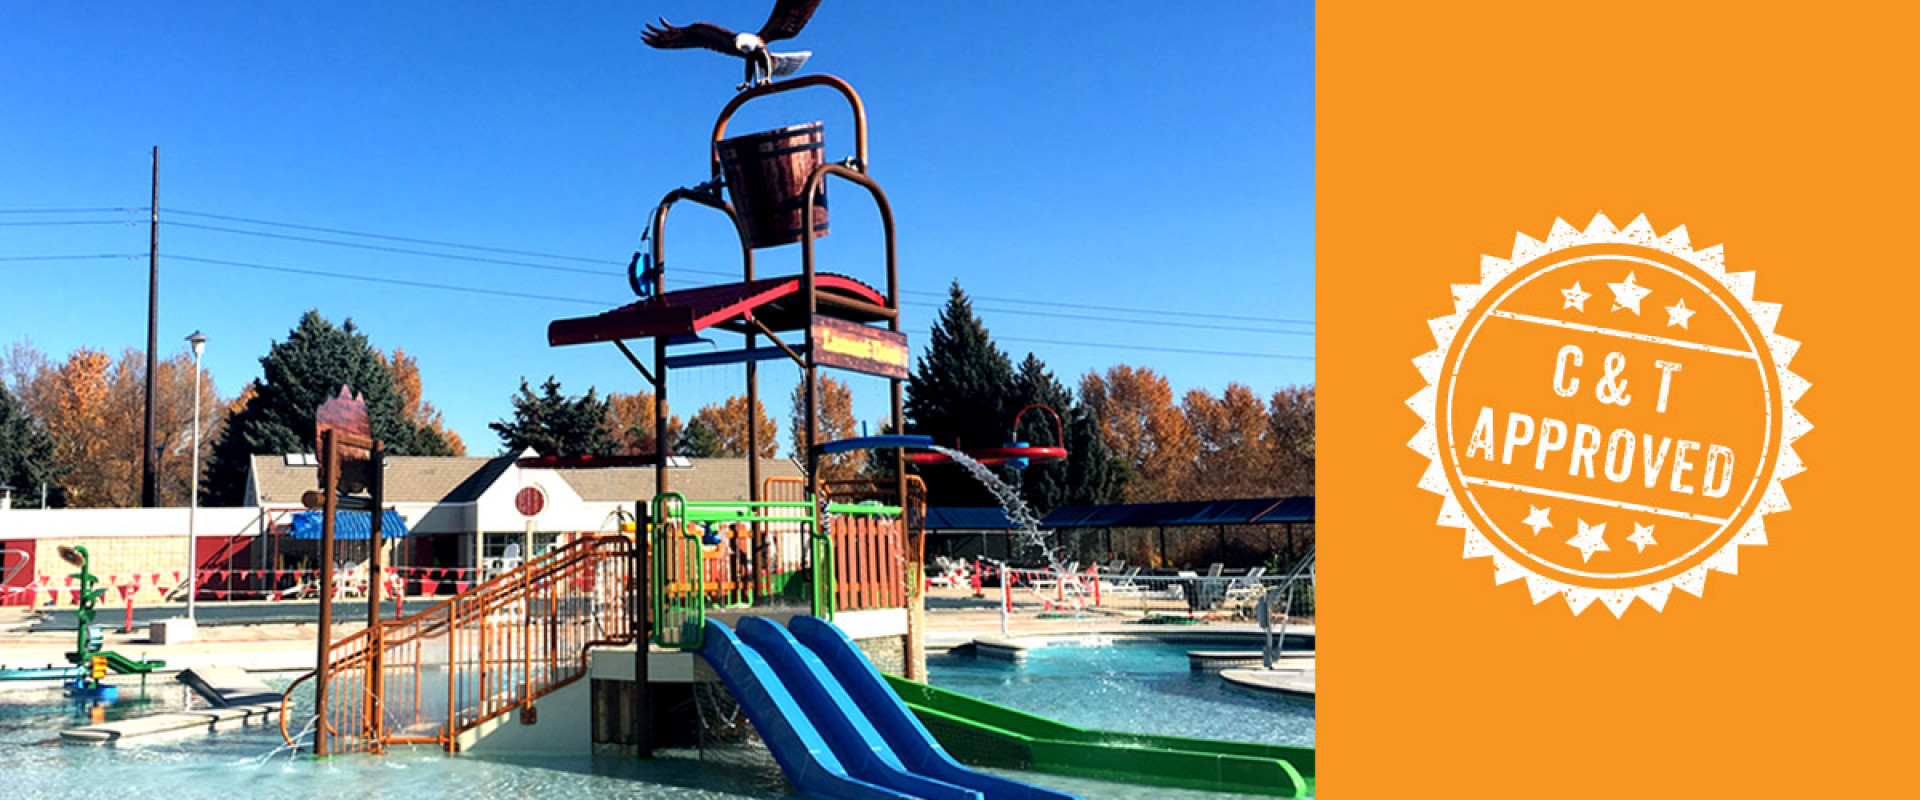 Waterslides and Aquatic Play Units Undergo Commissioning & Training in Colorado